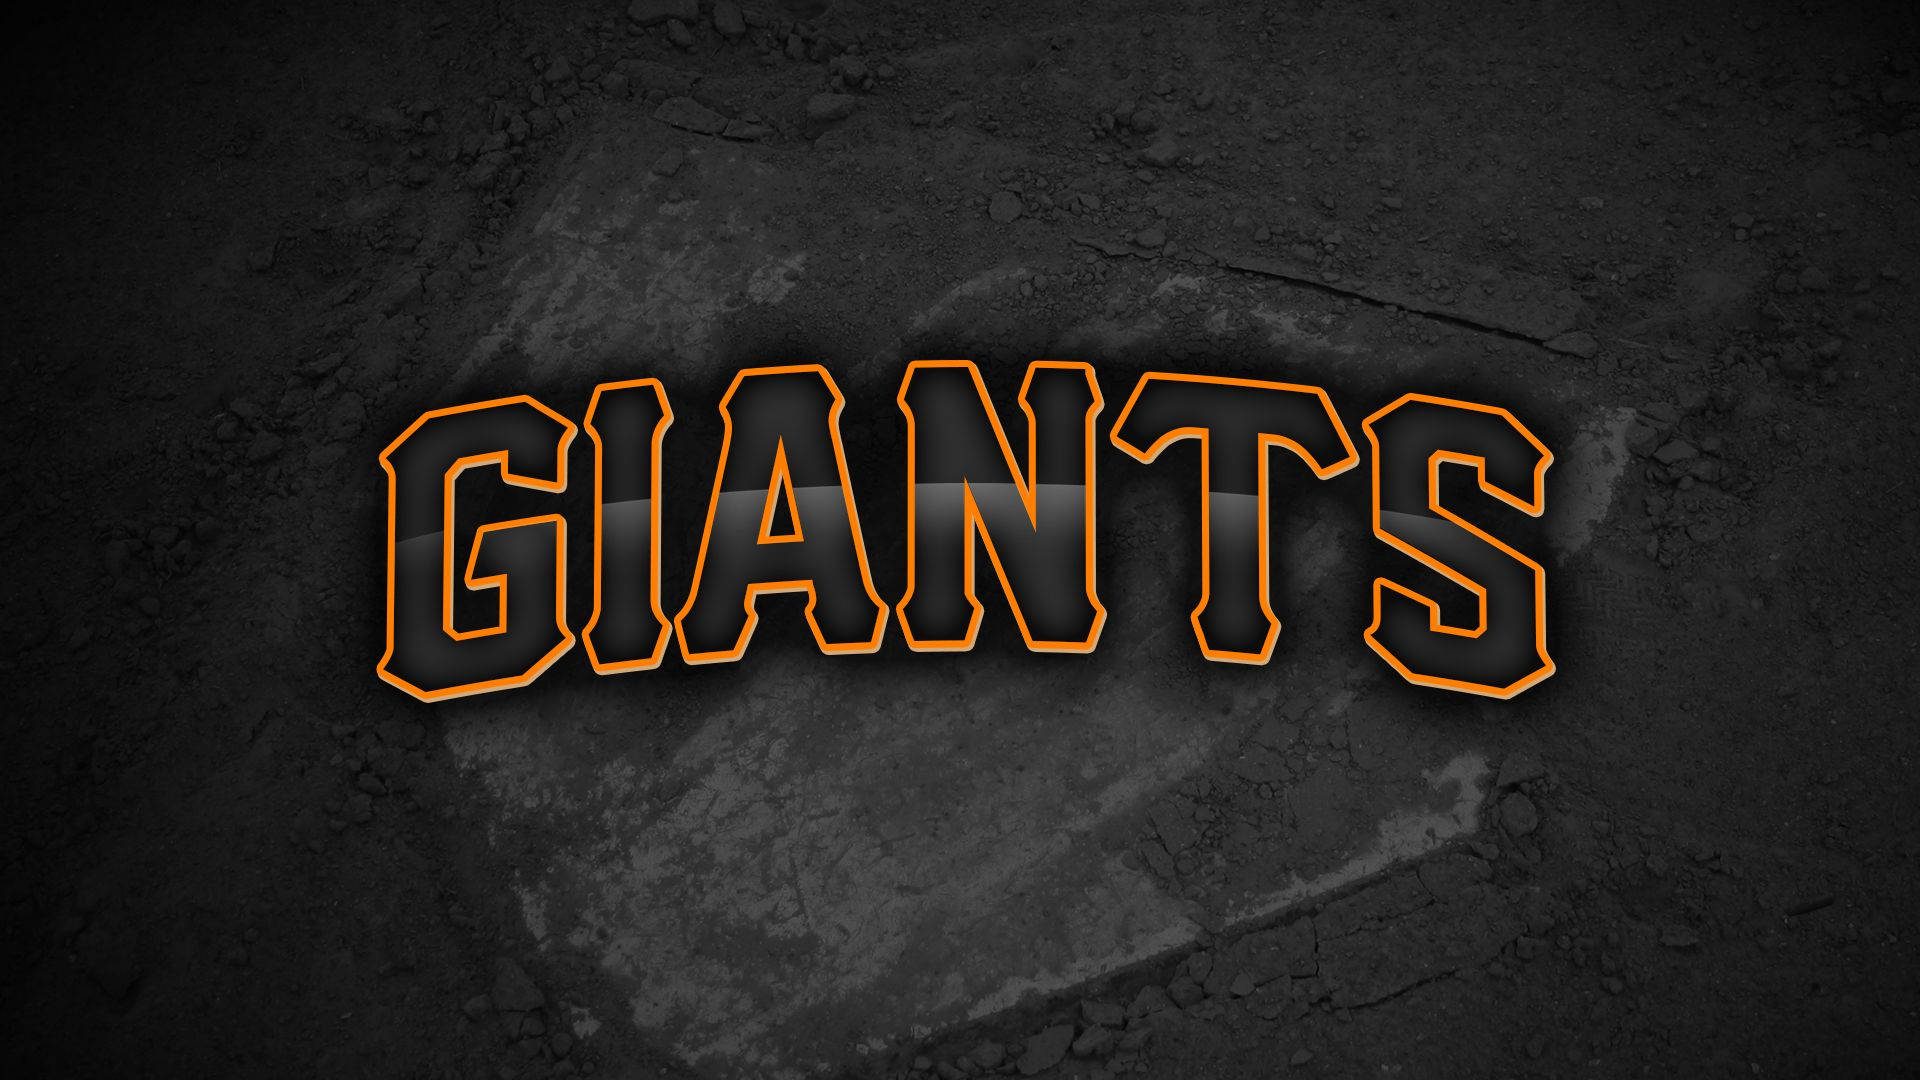 San Francisco Giants On Cement Background Background